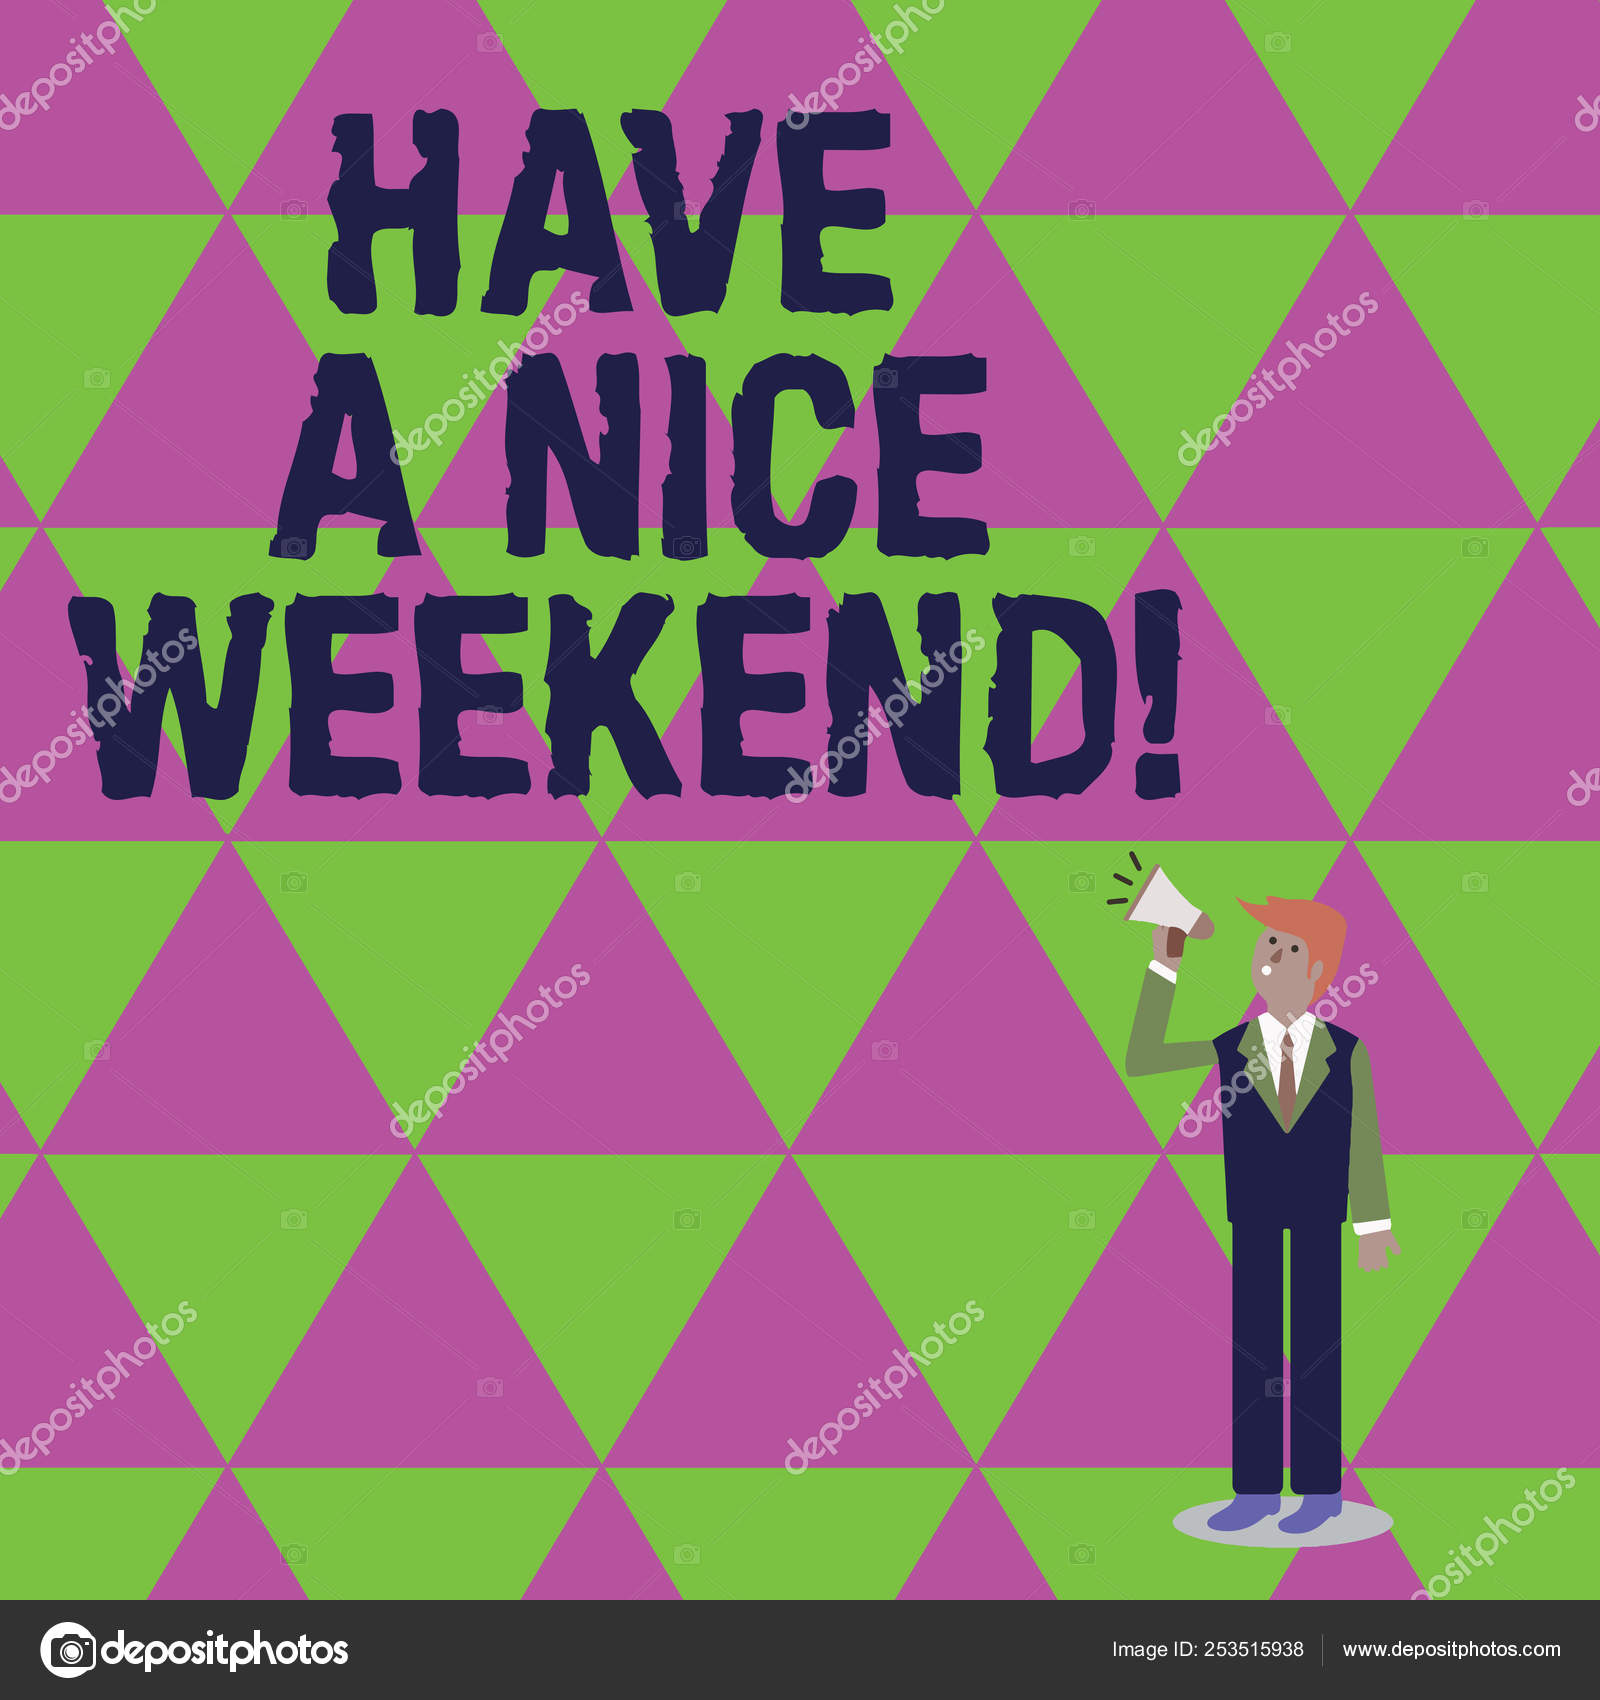 Have A Nice Weekend Word Lettering Stock Illustration - Download